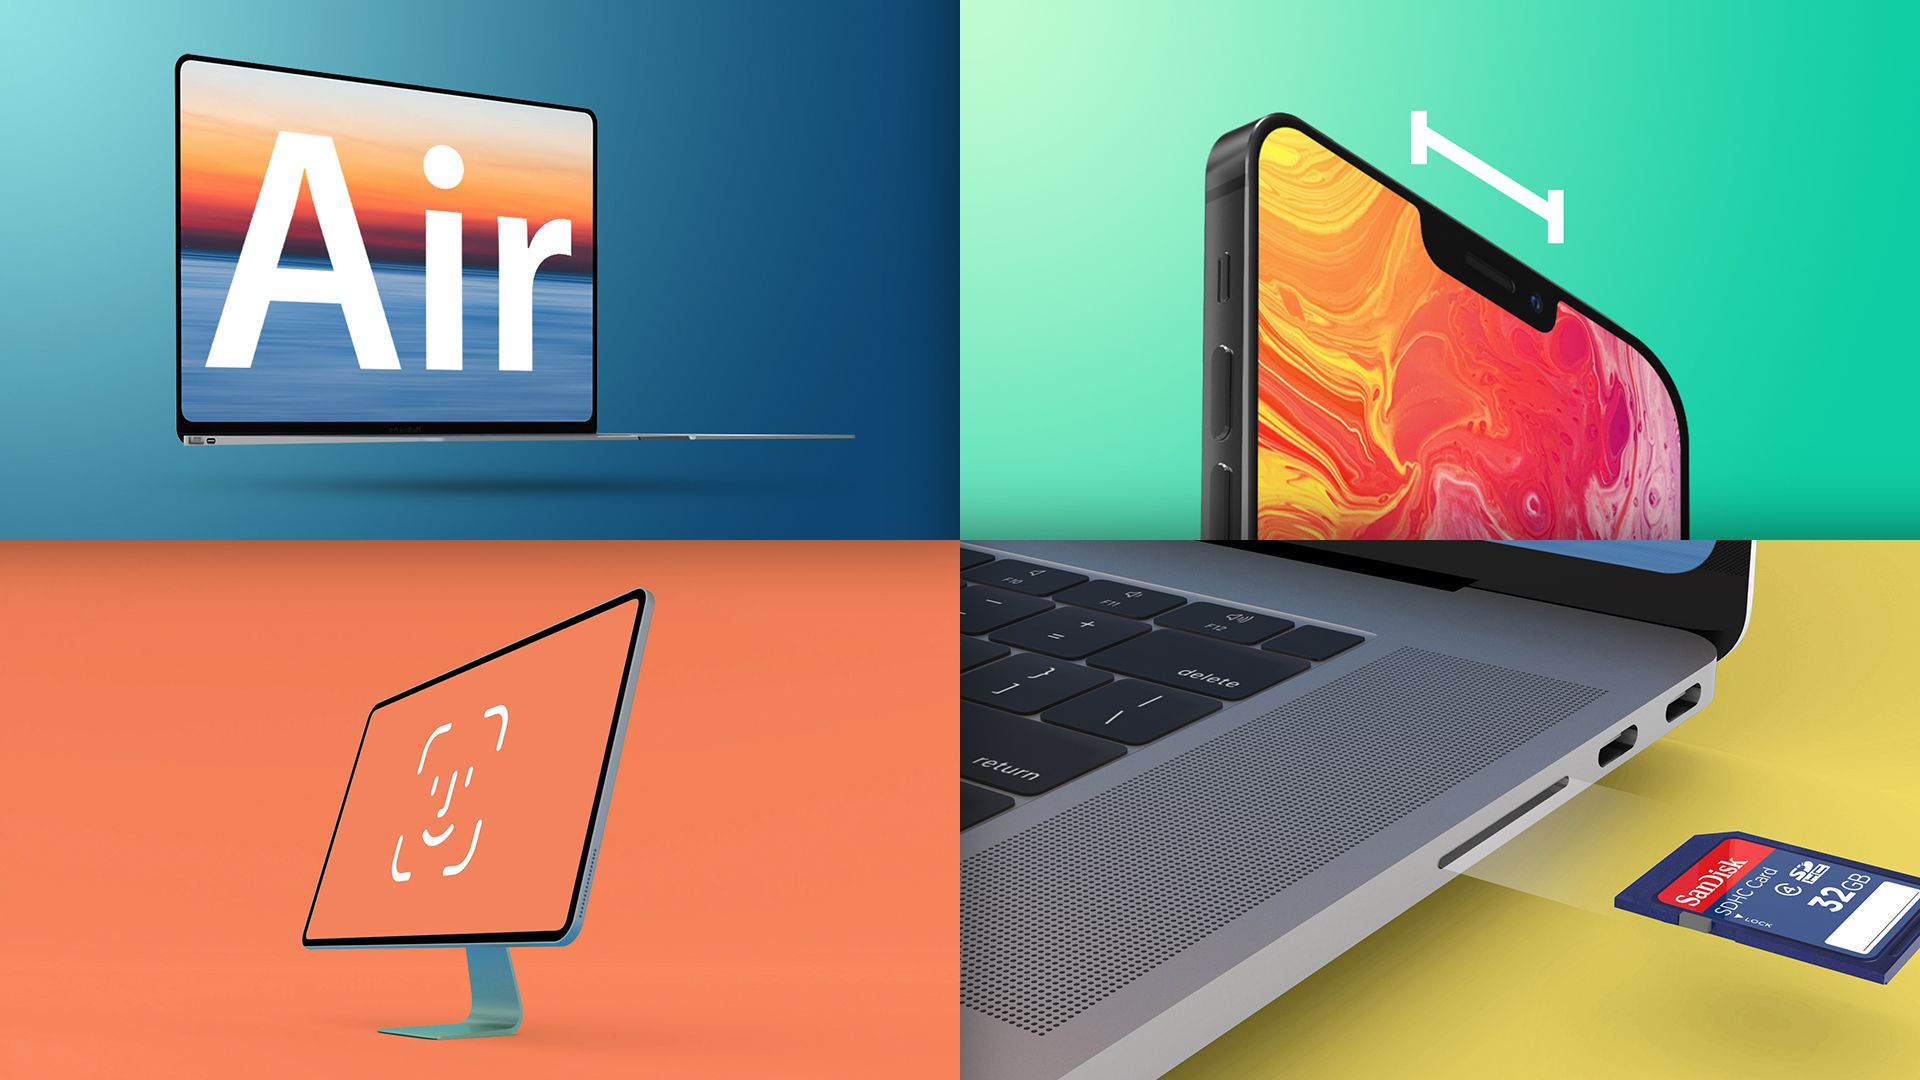 Hot news: MacBook Air is 'thinner and lighter', iPhone 13 is smaller, iOS 14.4 in